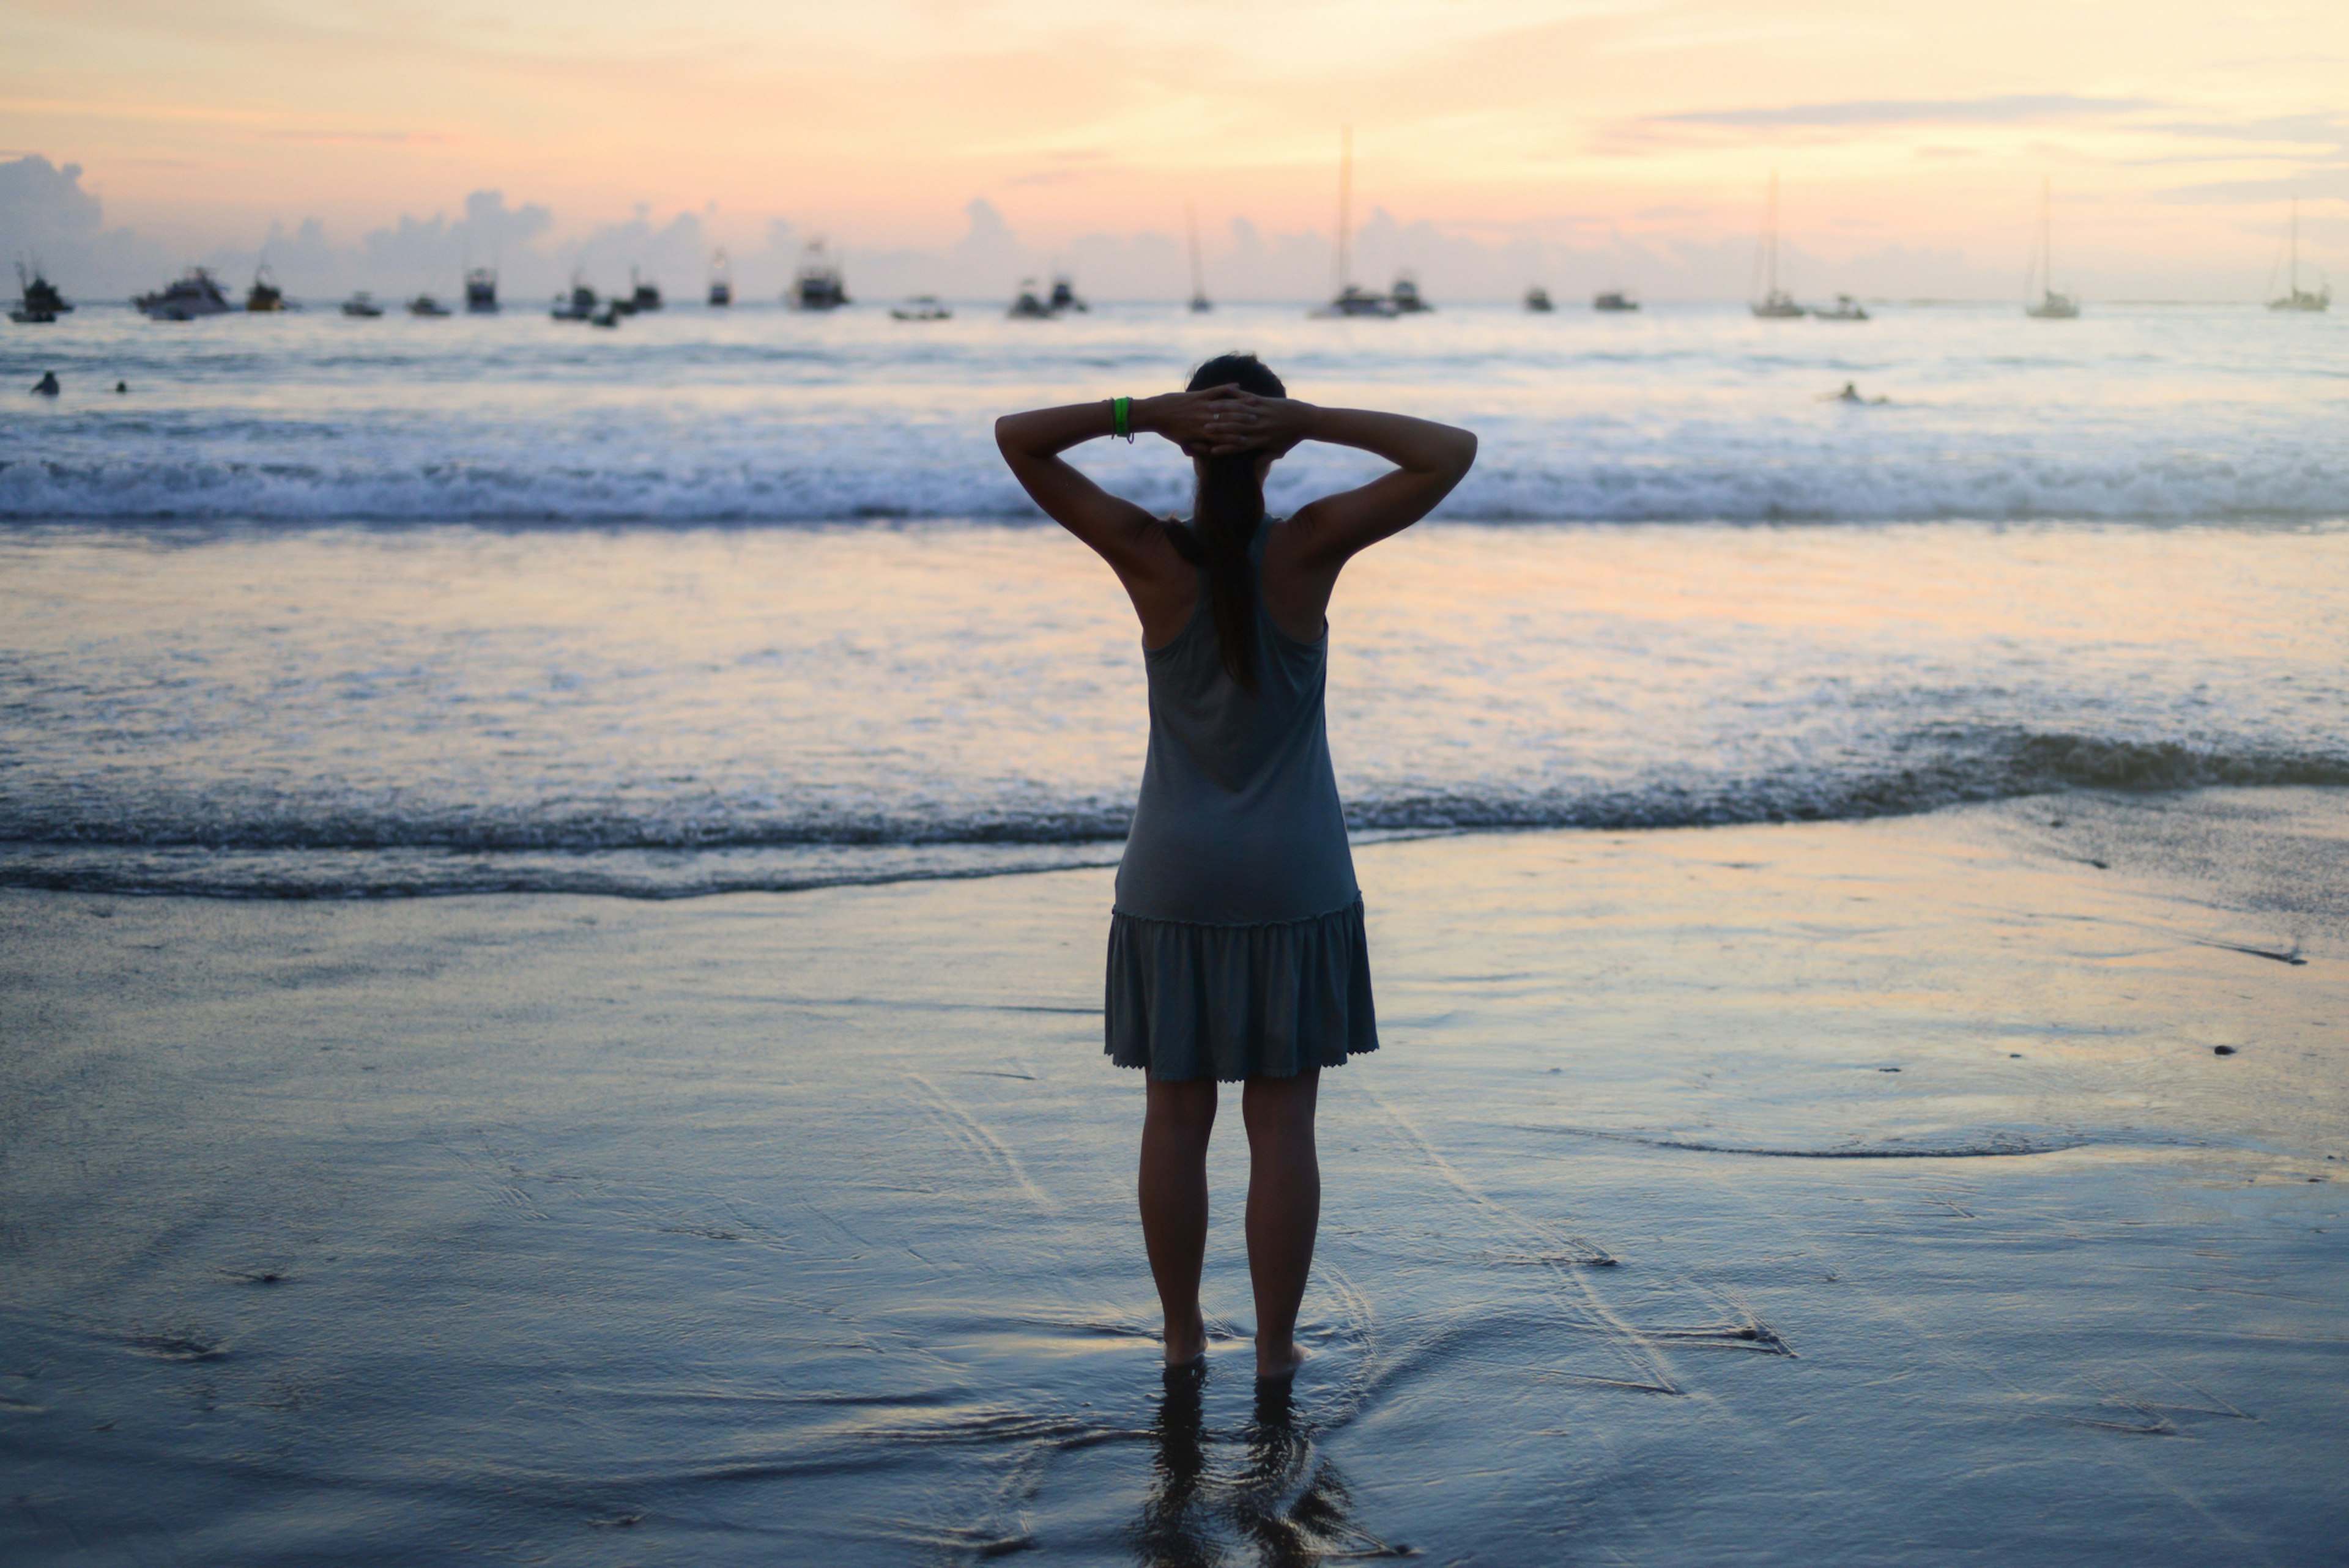 Woman wearing dress on the beach with hands up supporting the head.The woman has her feet in the water during sunset in San Juan del Sur, Nicaragua.
555761647
Woman wearing dress on the beach with hands up supporting the head.The woman has her feet in the water during sunset in San Juan del Sur, Nicaragua.